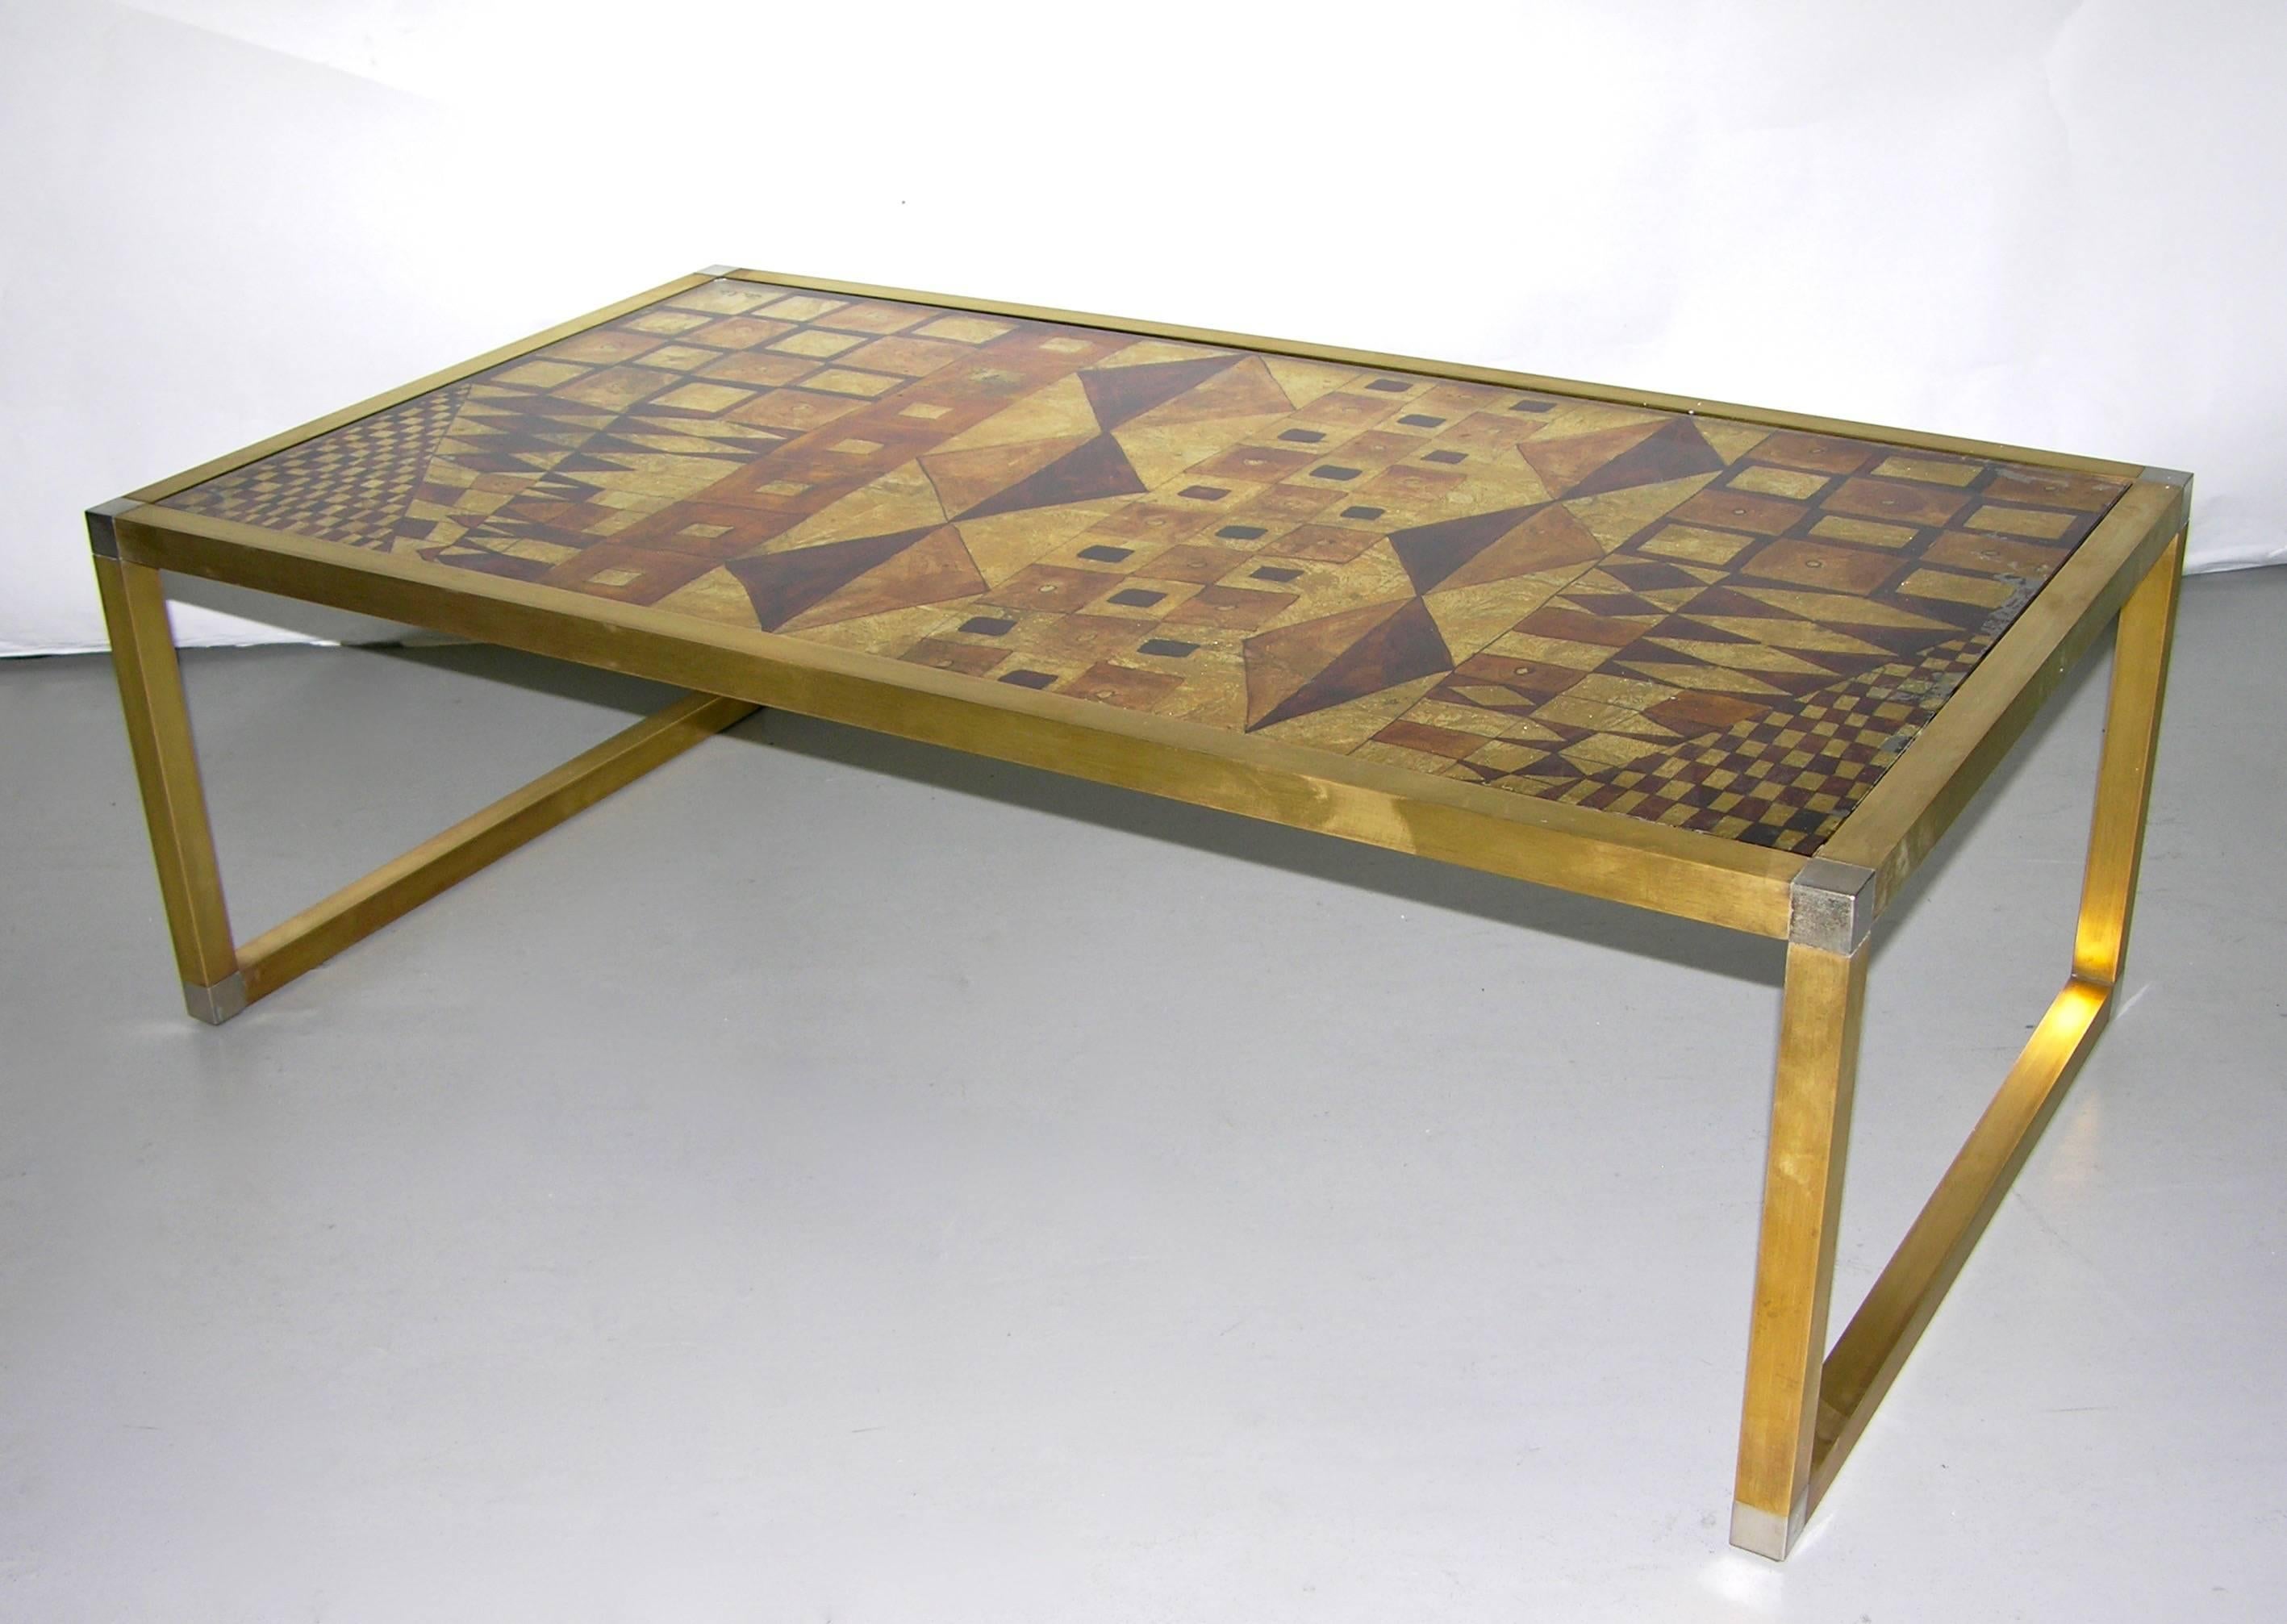 Italian one-of-a-kind 1970s low table of modern shape, a unique piece hand gilt and signed by Rita Lois, Italian painter and artist. The Art Deco inspired eglomise pattern created with different shades of pure metallic gold leaf like a geometric